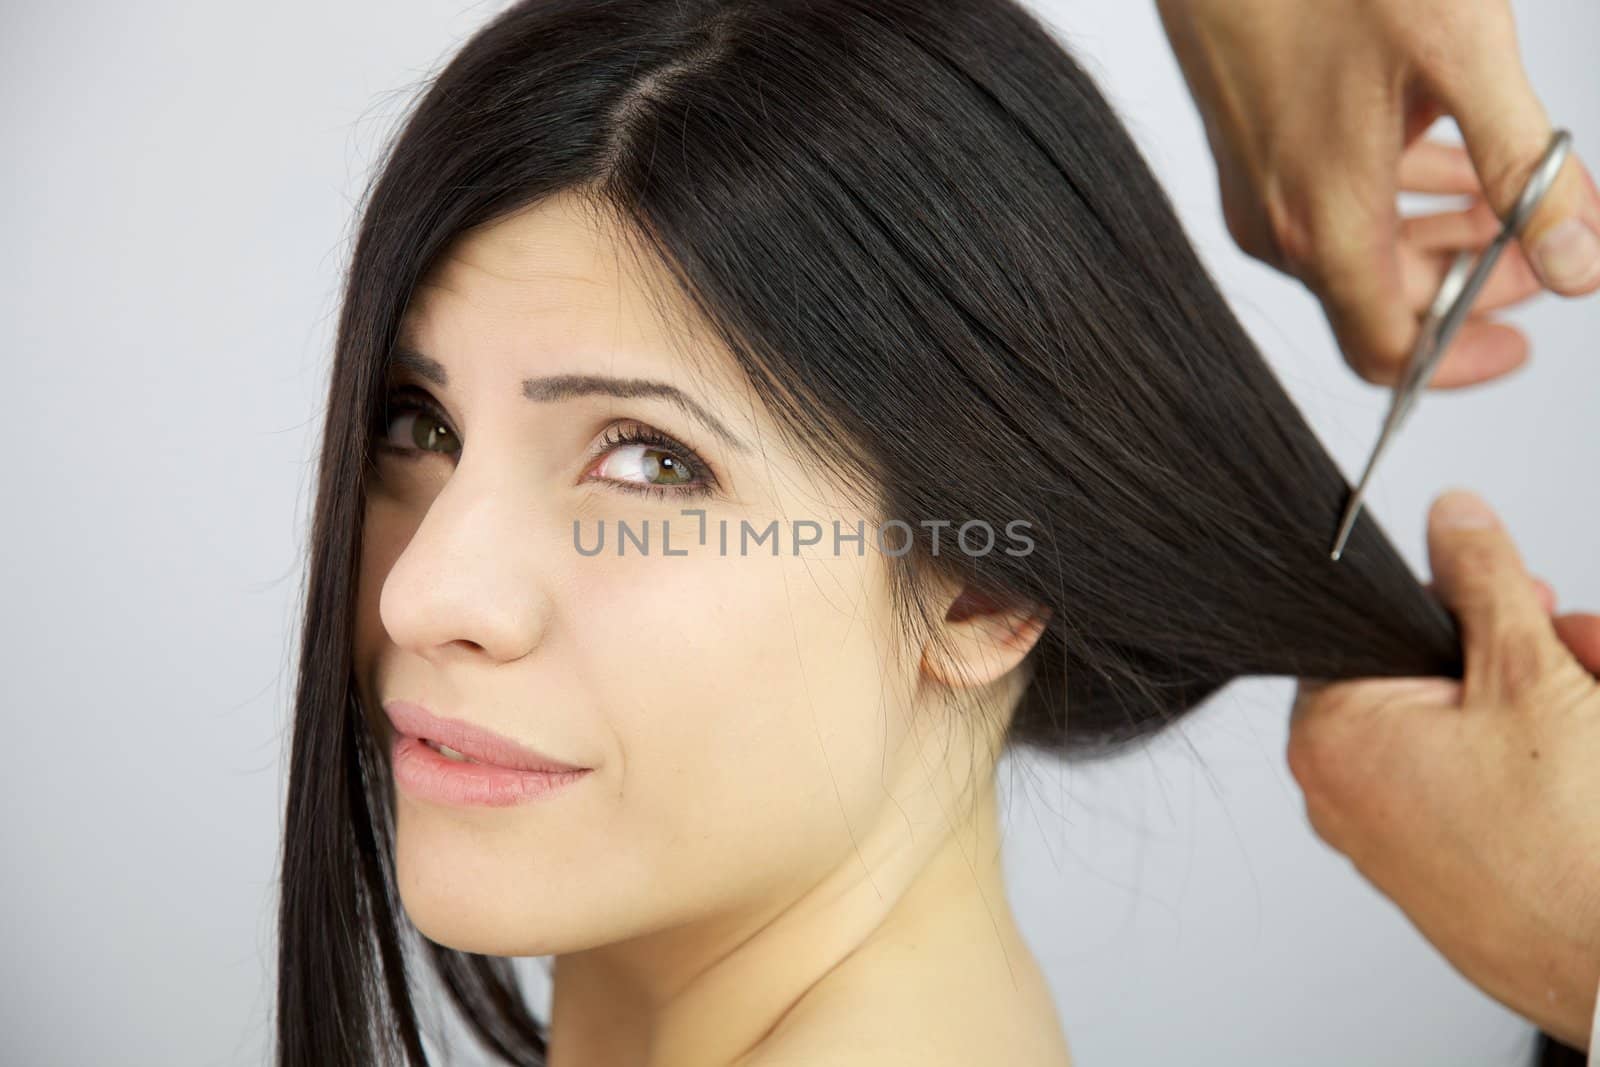 Female model with worried expression because her hair is being cut by hairdresser